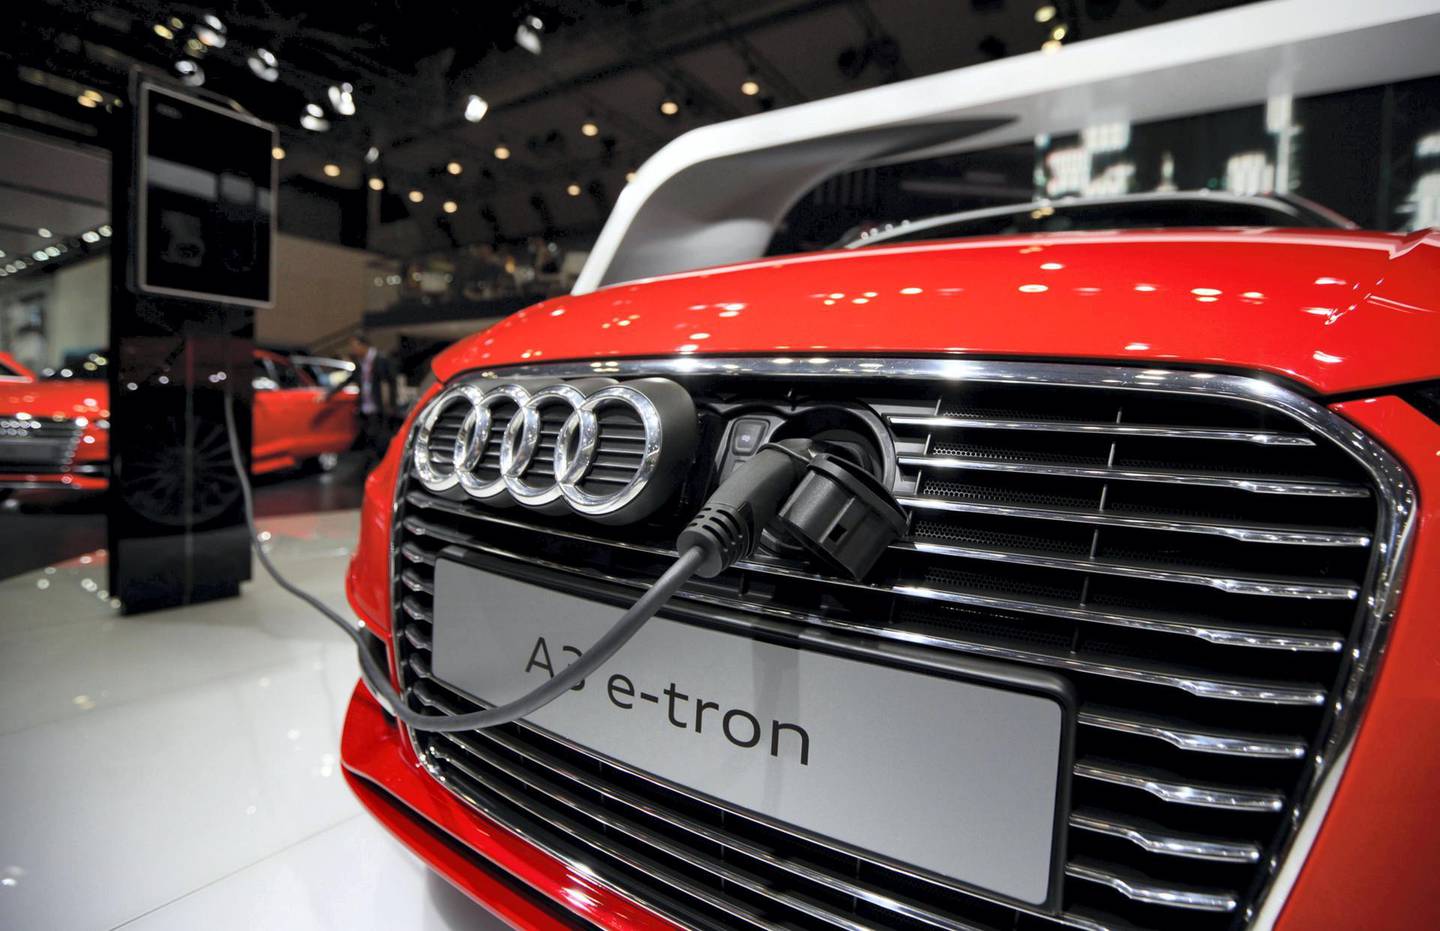 A charging cable is connected to the front grill of an Audi AG A3 e- tron electric vehicle at the 43rd Tokyo Motor Show 2013 in Tokyo, Japan, on Wednesday, Nov. 20, 2013. The autoshow will be open to the public from Nov. 23 to Dec. 1 at the Tokyo International Exhibition Center, also known as the Tokyo Big Sight. Photographer: Tomohiro Ohsumi/Bloomberg